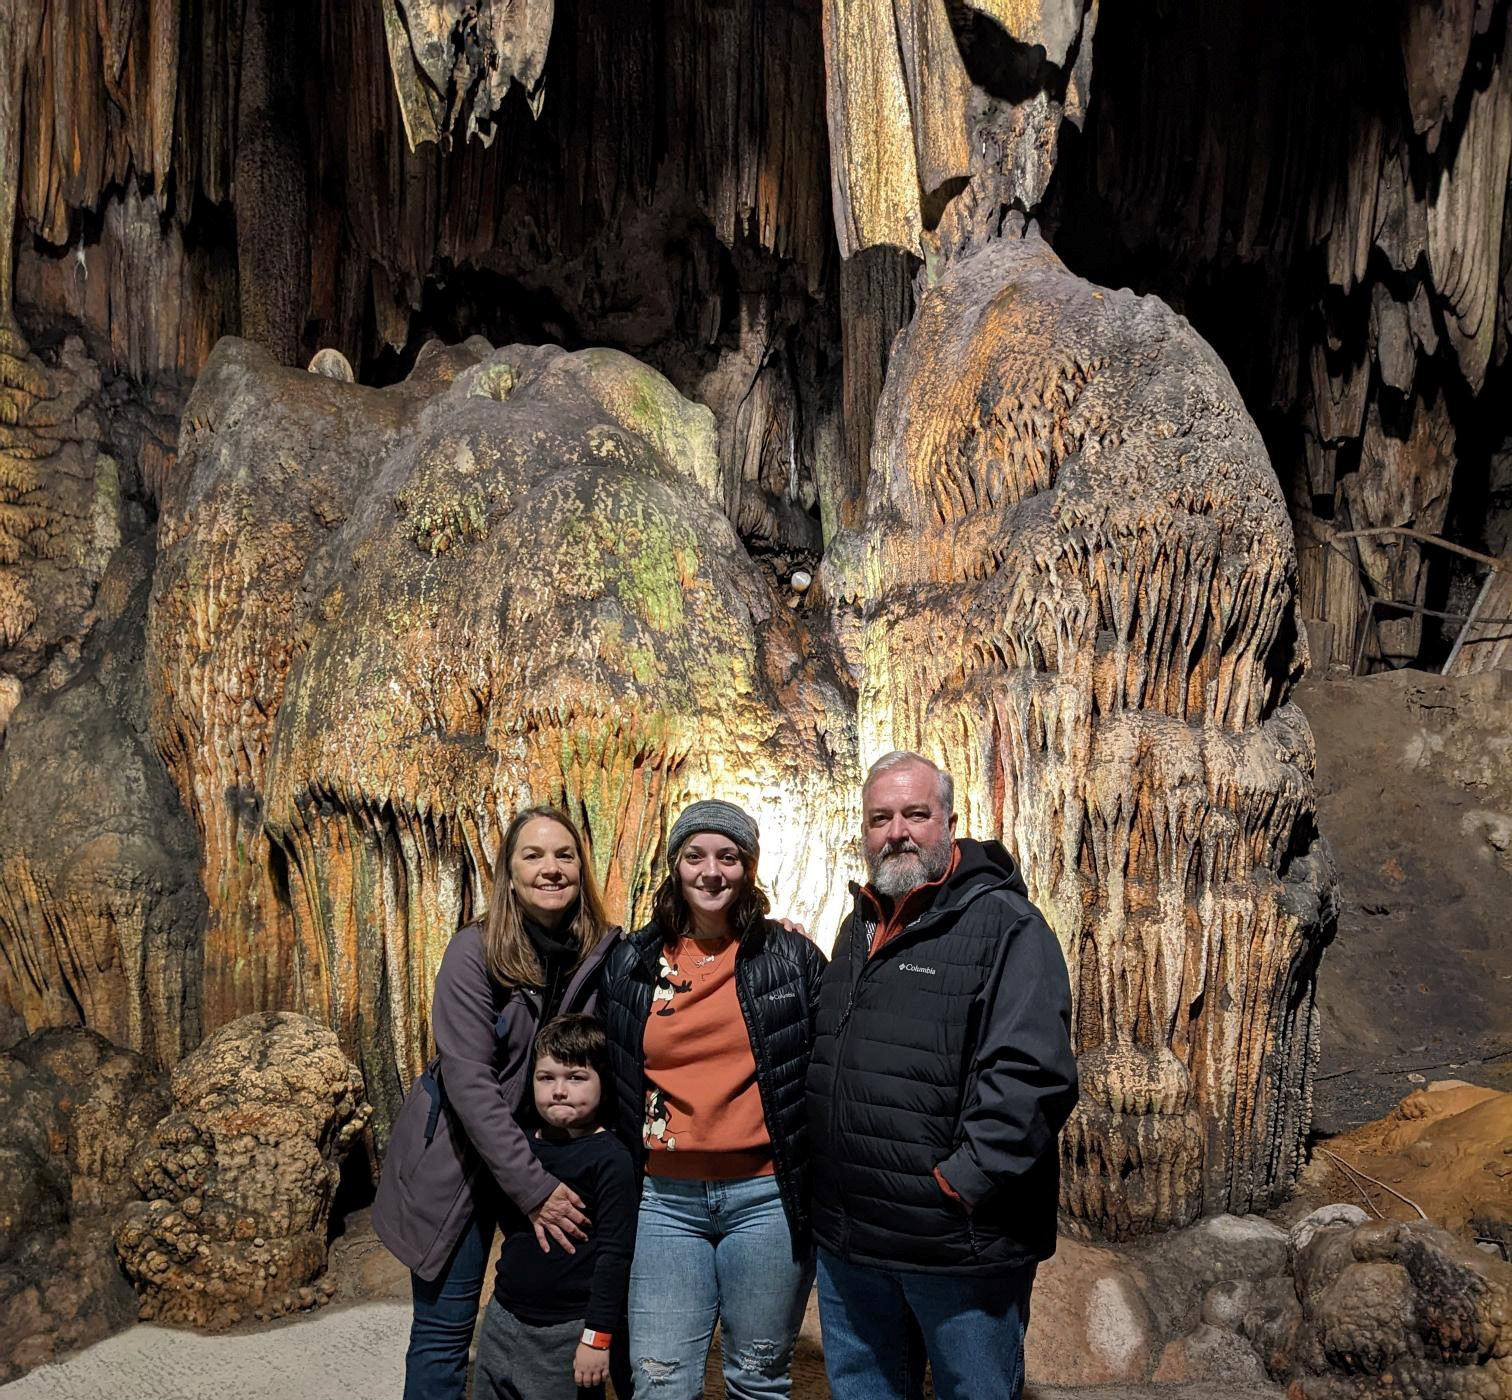 Image of Zaina and her family inside a cavern.